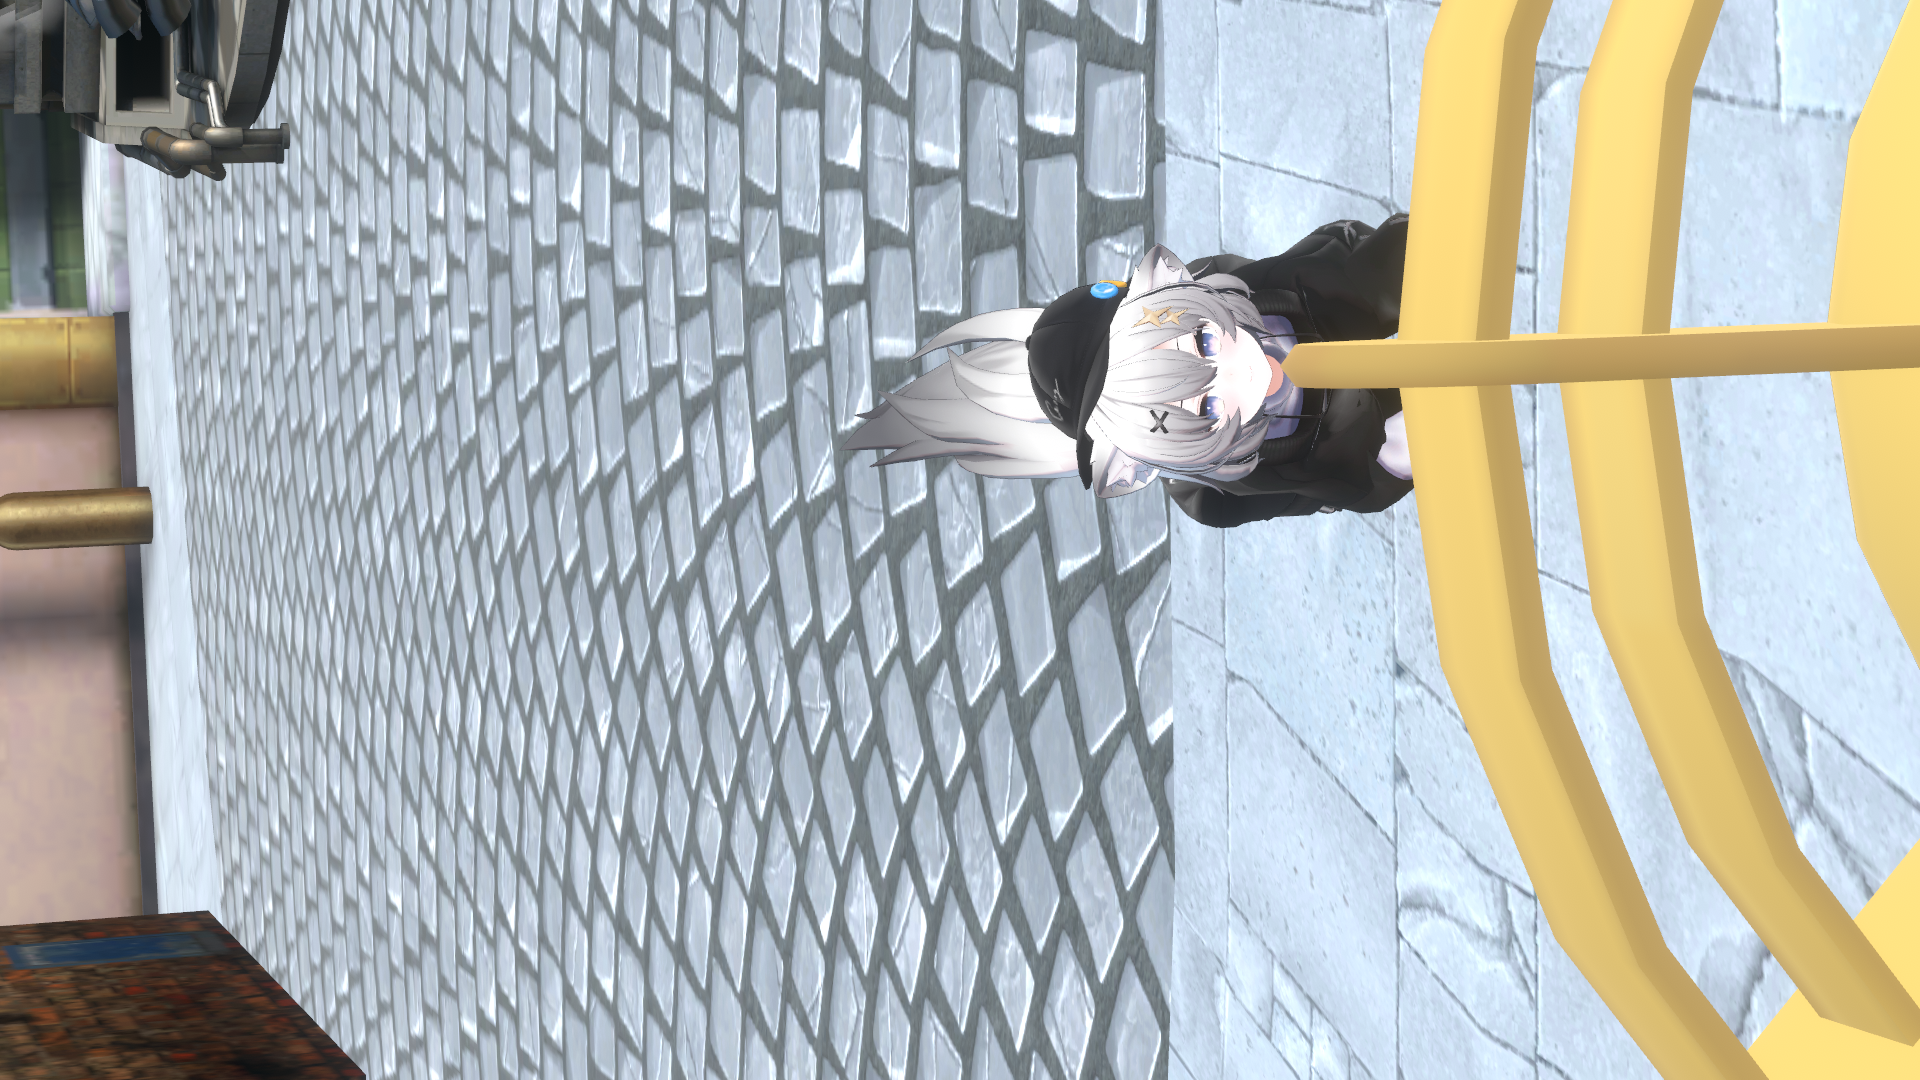 VRChat_1920x1080_2021-12-05_03-26-13.193.png